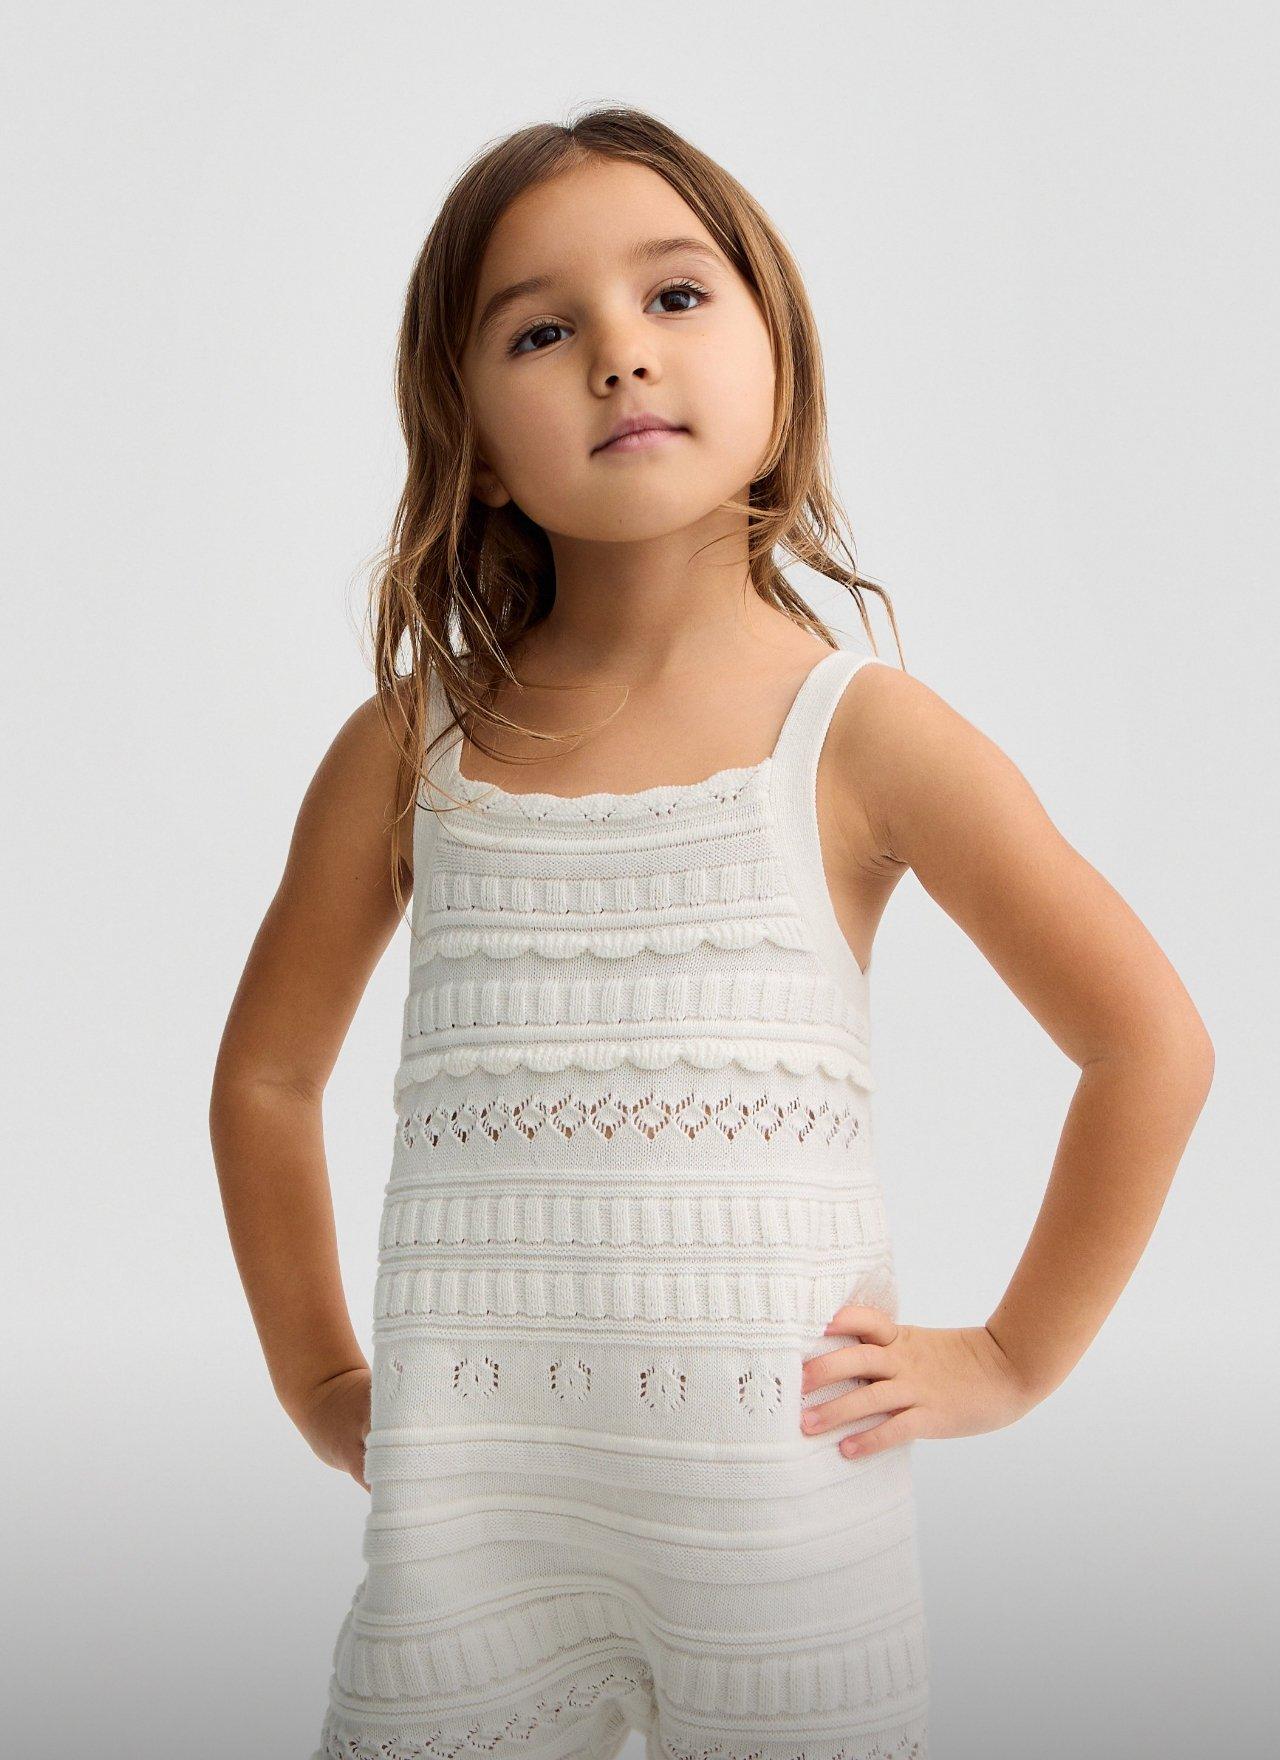 Shop Gap Canada for Casual Women's, Men's, Maternity, Baby & Kids Clothes